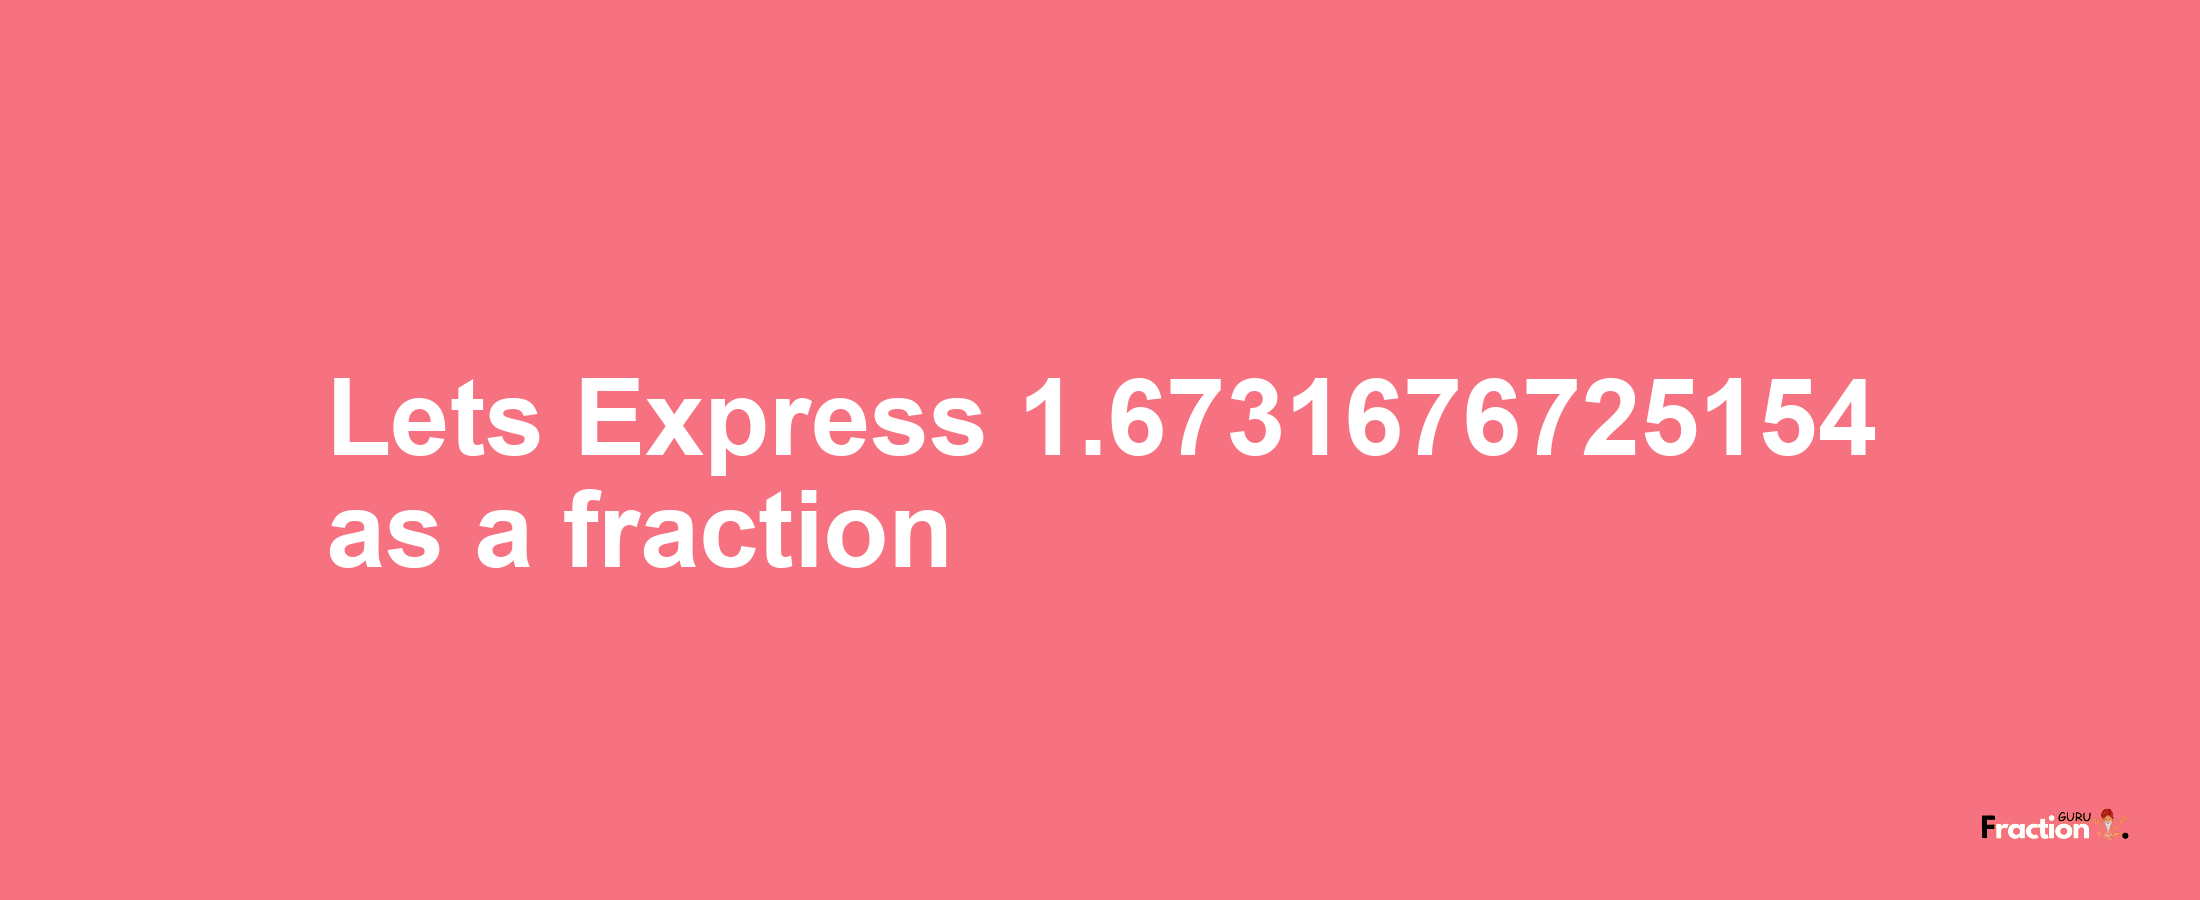 Lets Express 1.6731676725154 as afraction